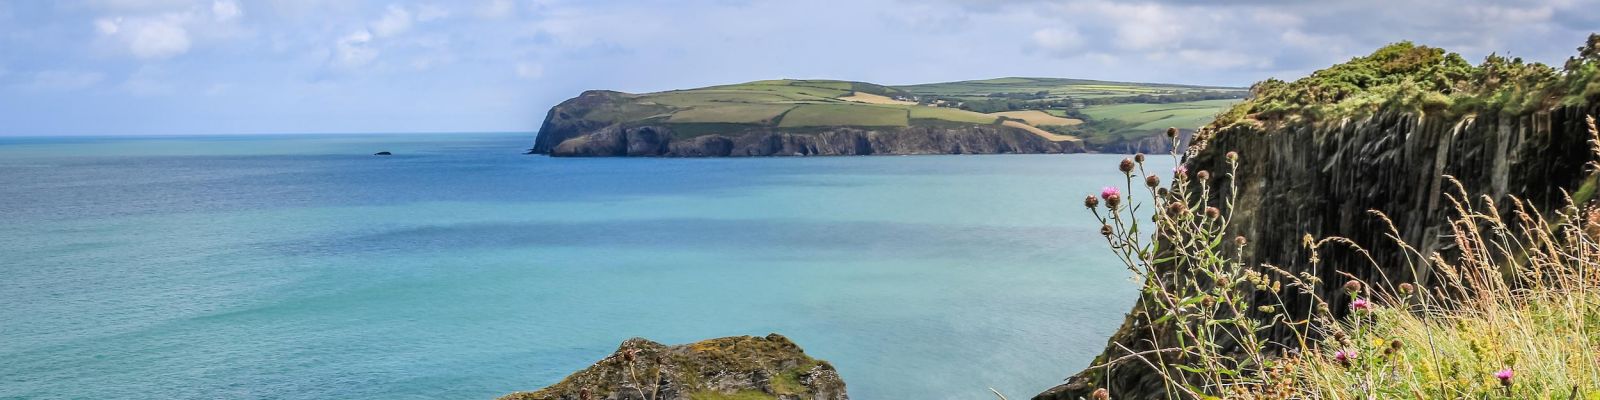 Holiday Cottages In Pembrokeshire To Rent Self Catering